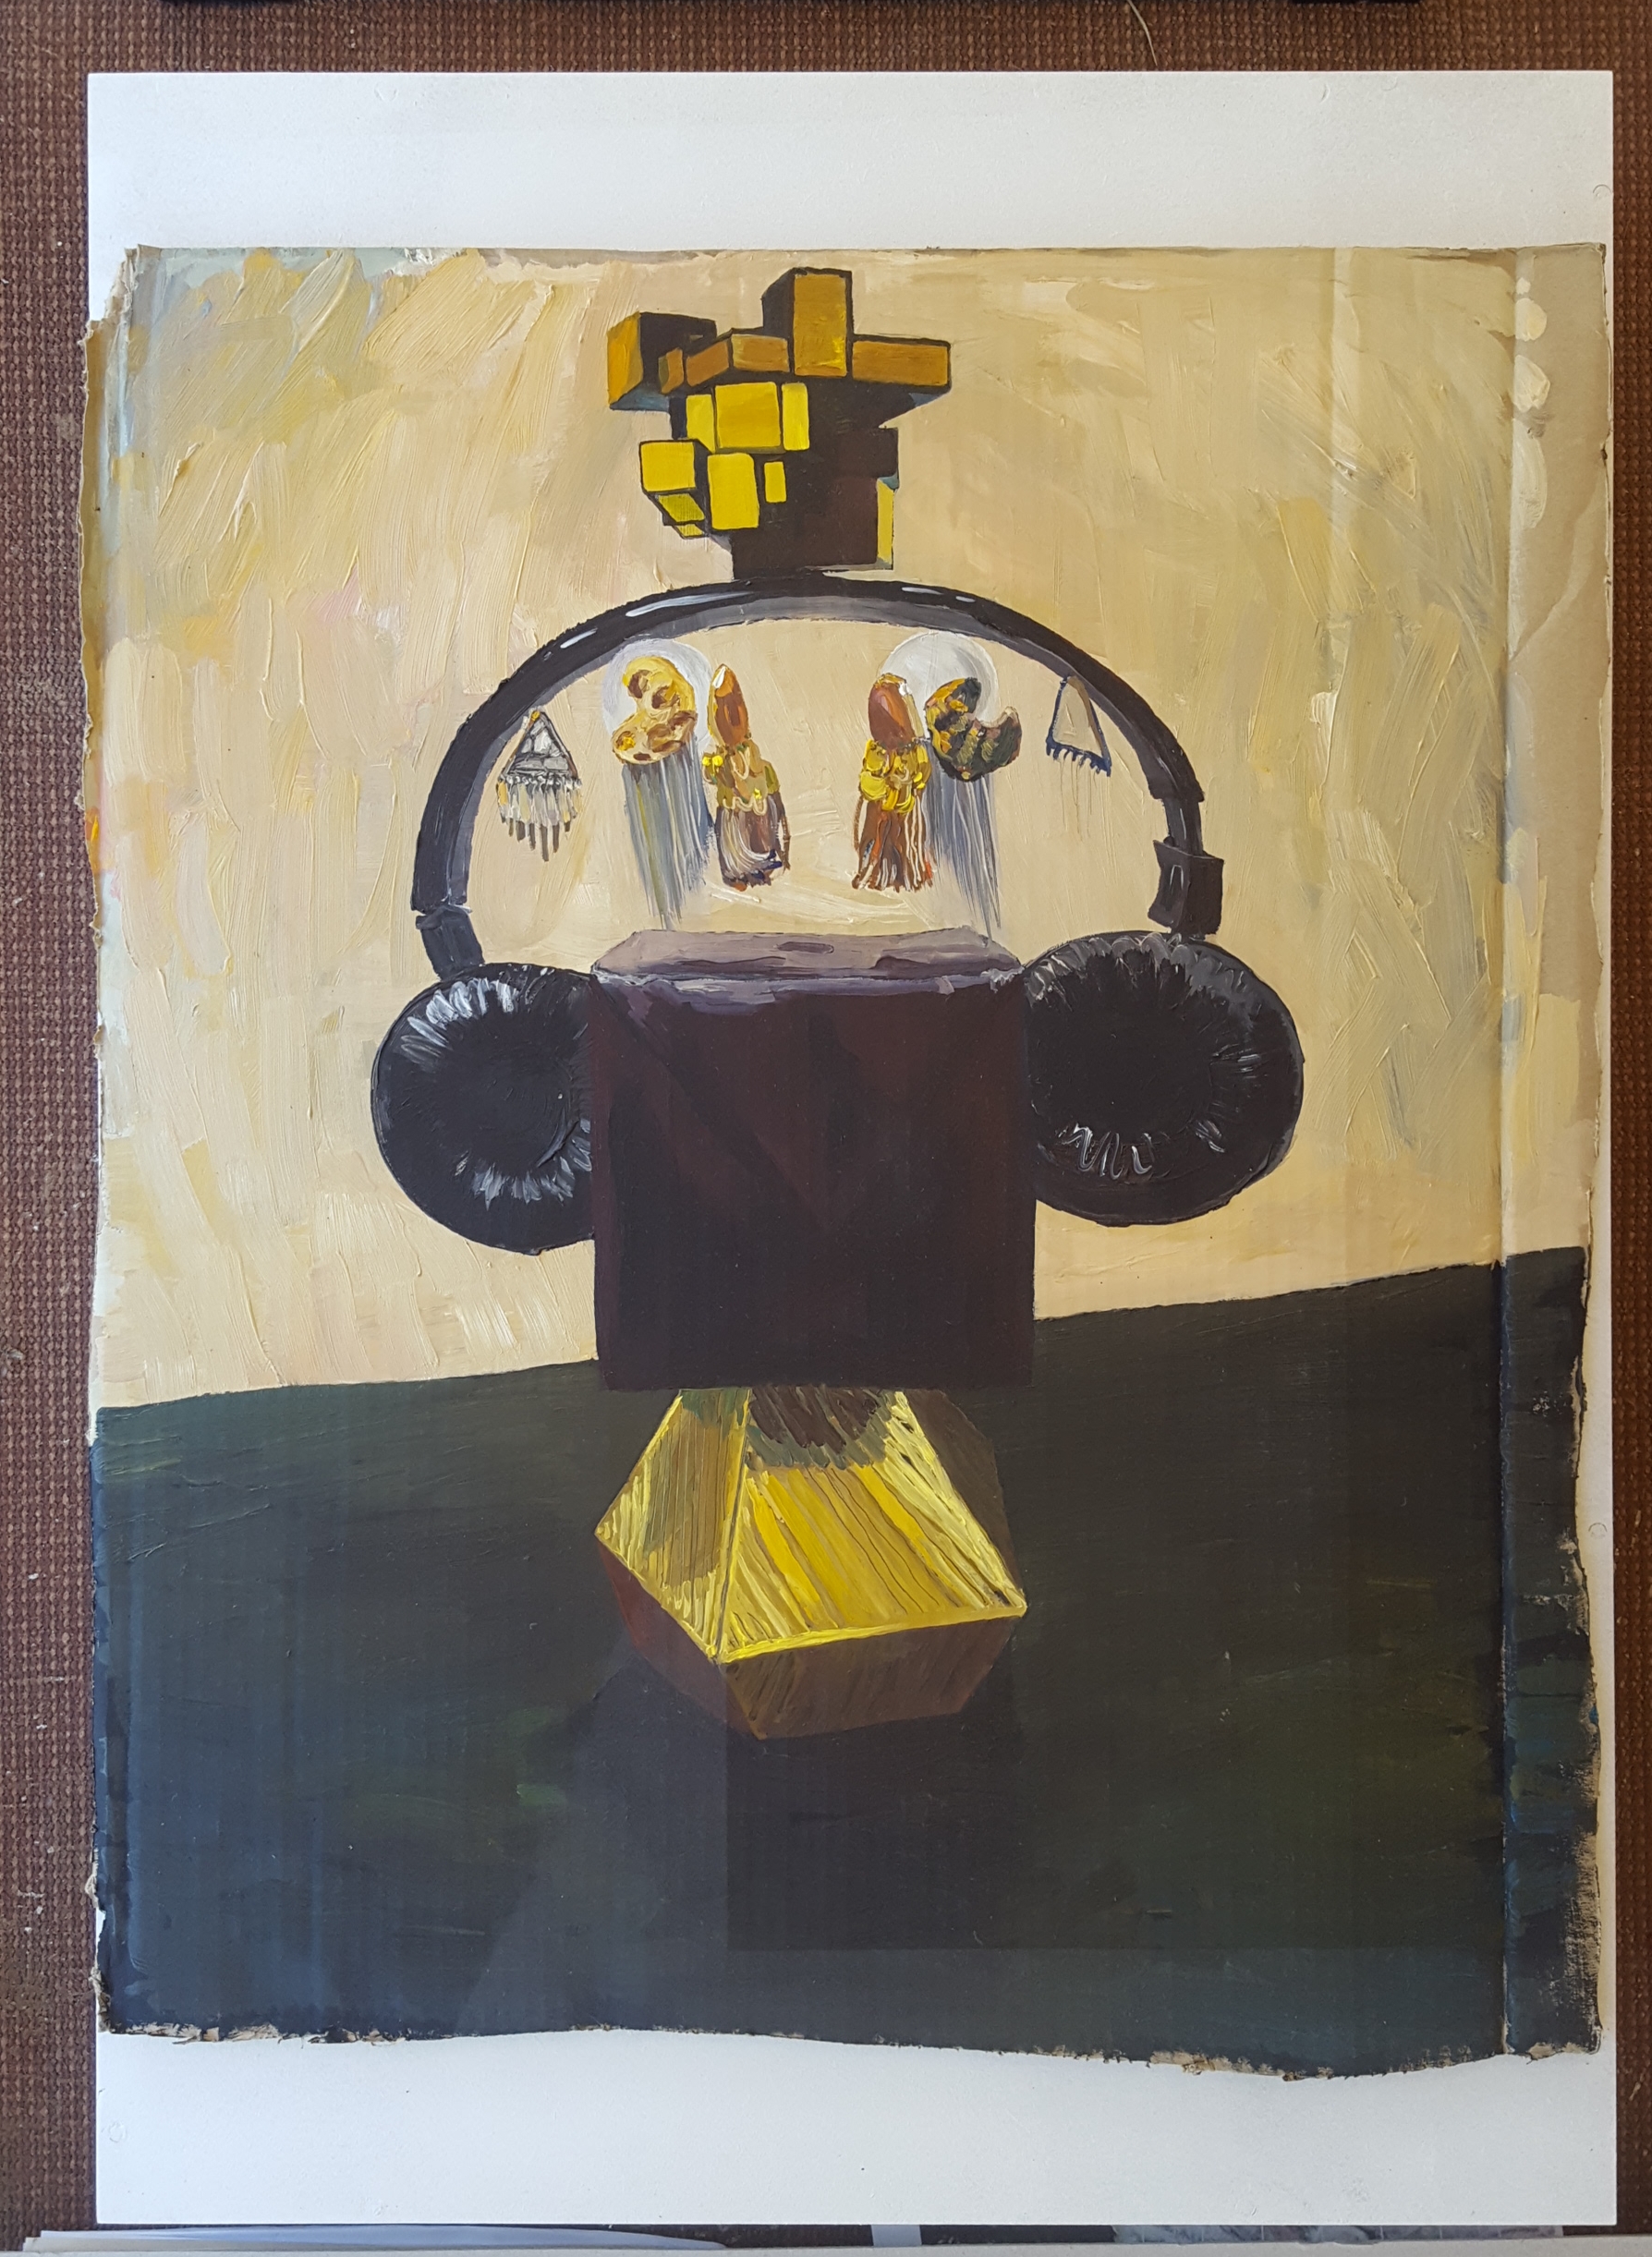 back: Tax Evasion Sculpture Painting